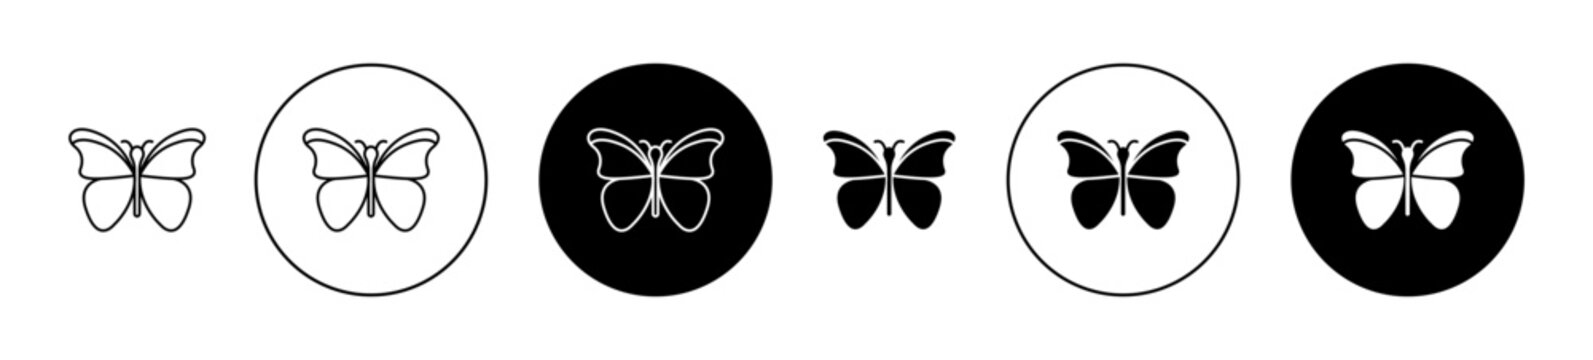 Butterfly Vector Illustration Set. Monarch Insect Nature Sign in Suitable for Apps and Websites UI Design Style.